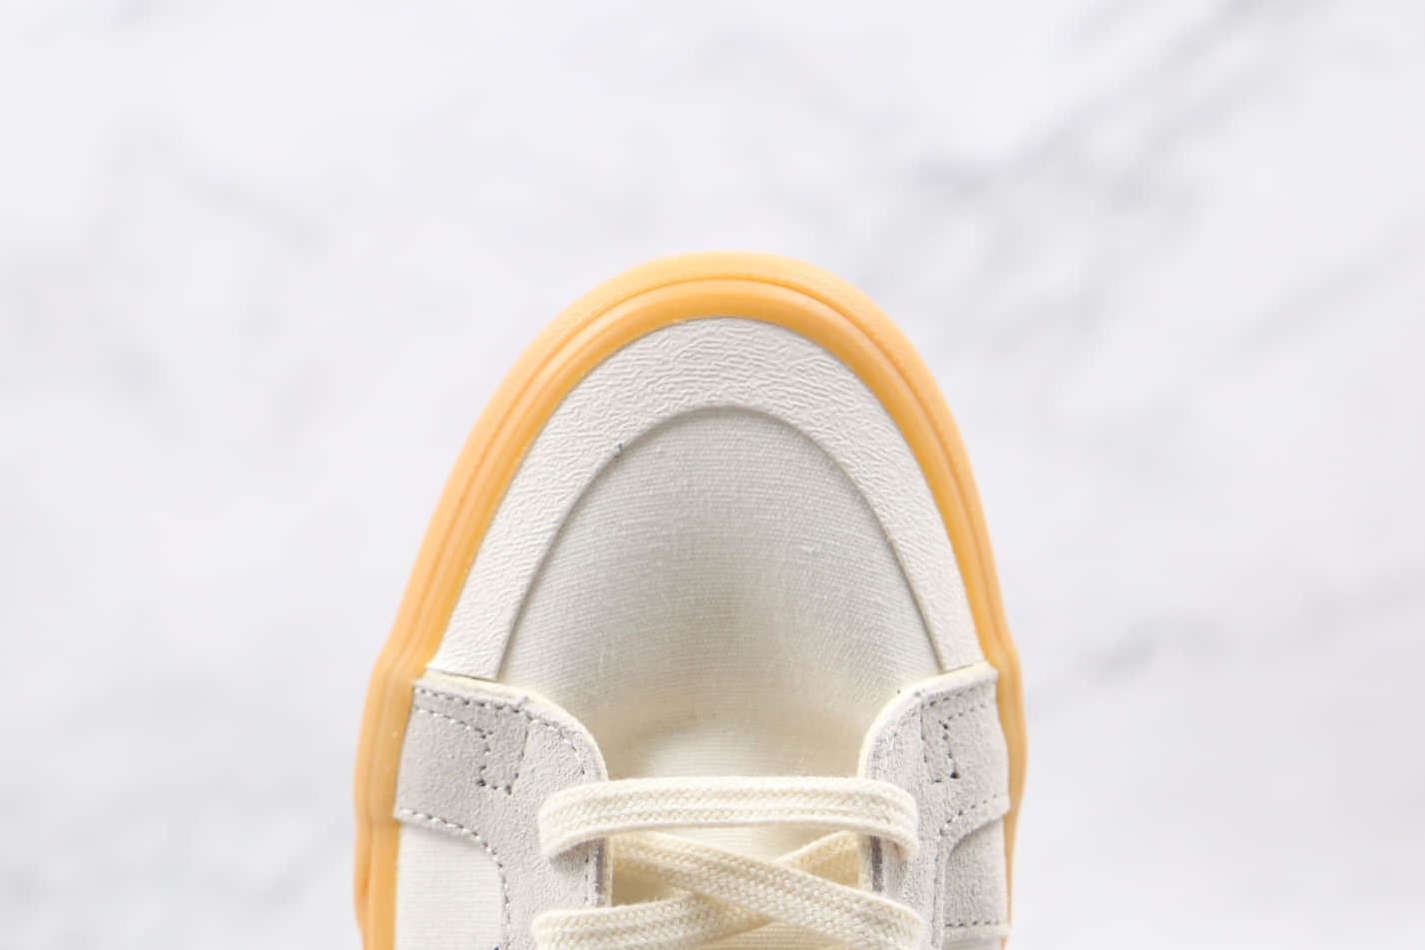 Vans Sk8-Hi Sail Gum Sole - Classic Style and Exceptional Comfort